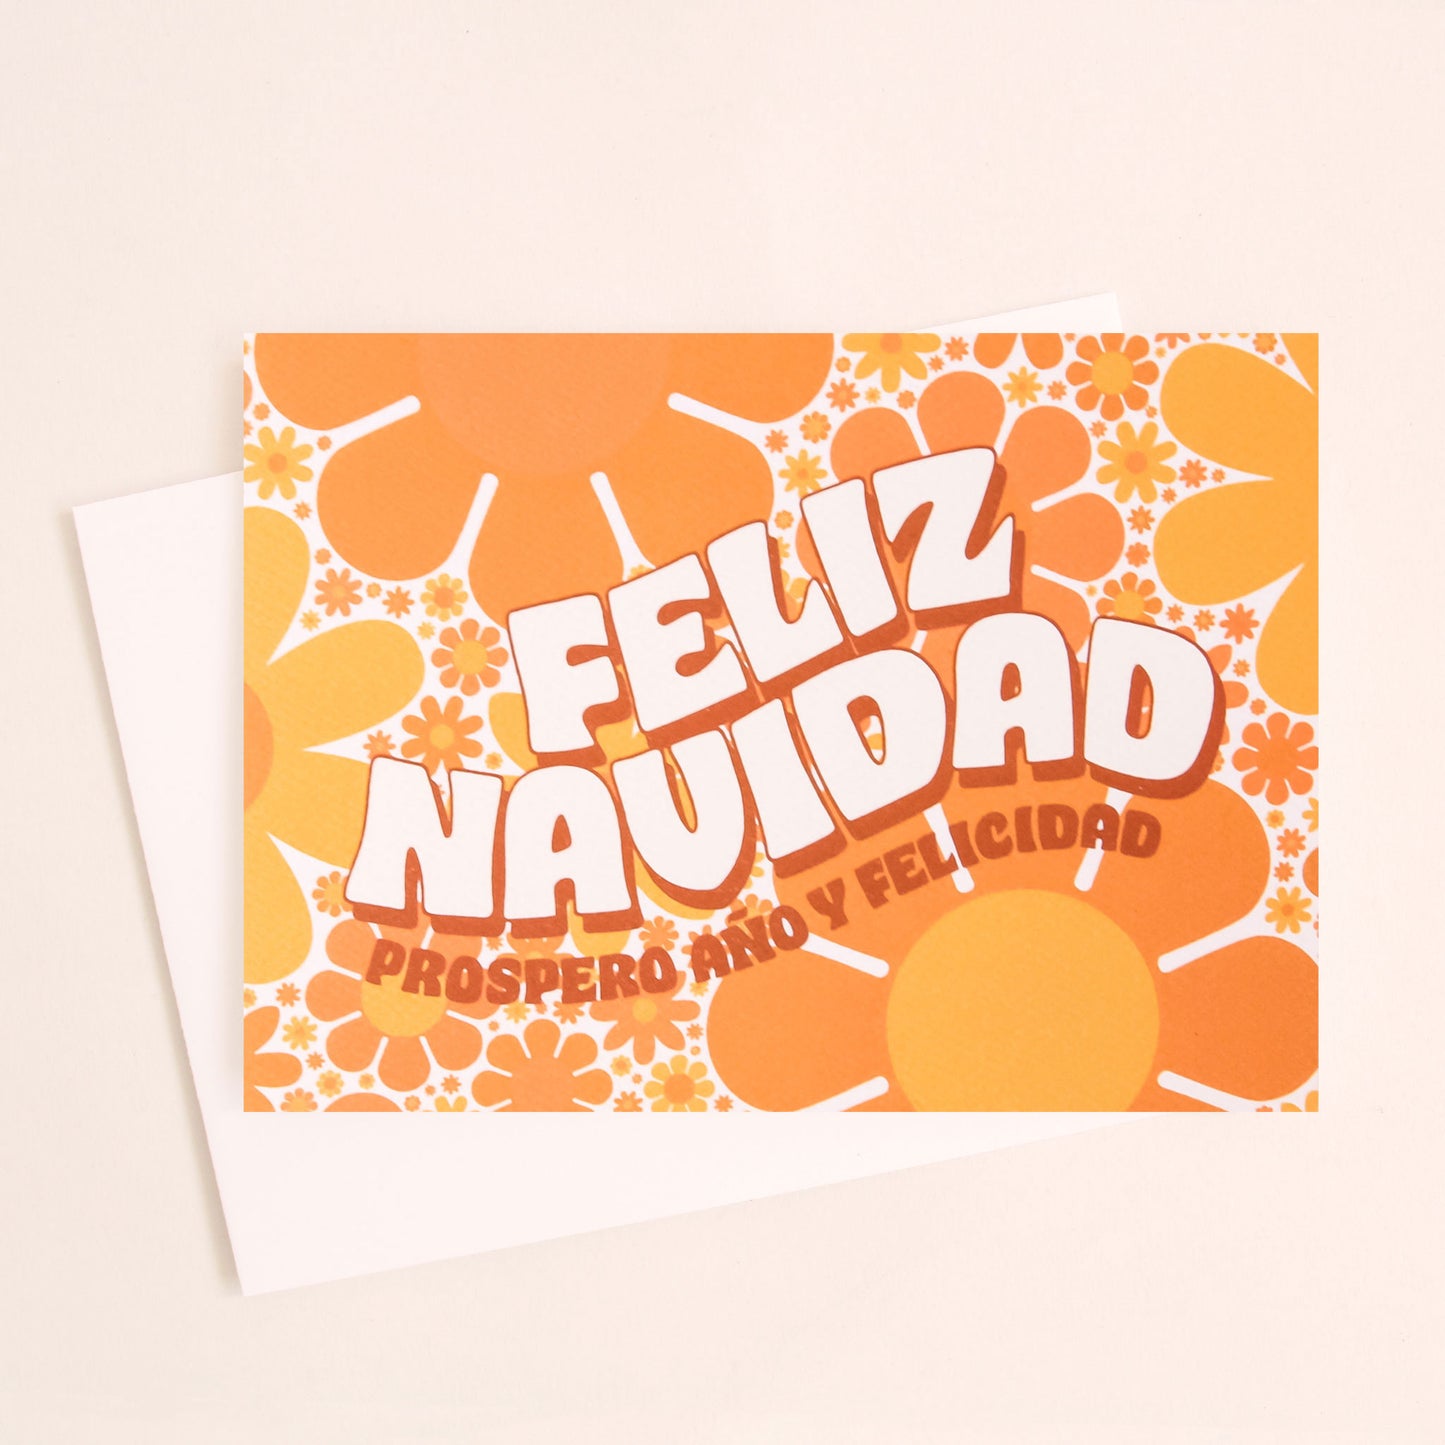 Greeting card filled with yellow and orange retro flower print. The card reads 'Feliz Navidad' in white curved bubble letters. Below reads 'prosper año y felicidad' in rust colored lettering. The card is accompanied by a solid white envelope. 